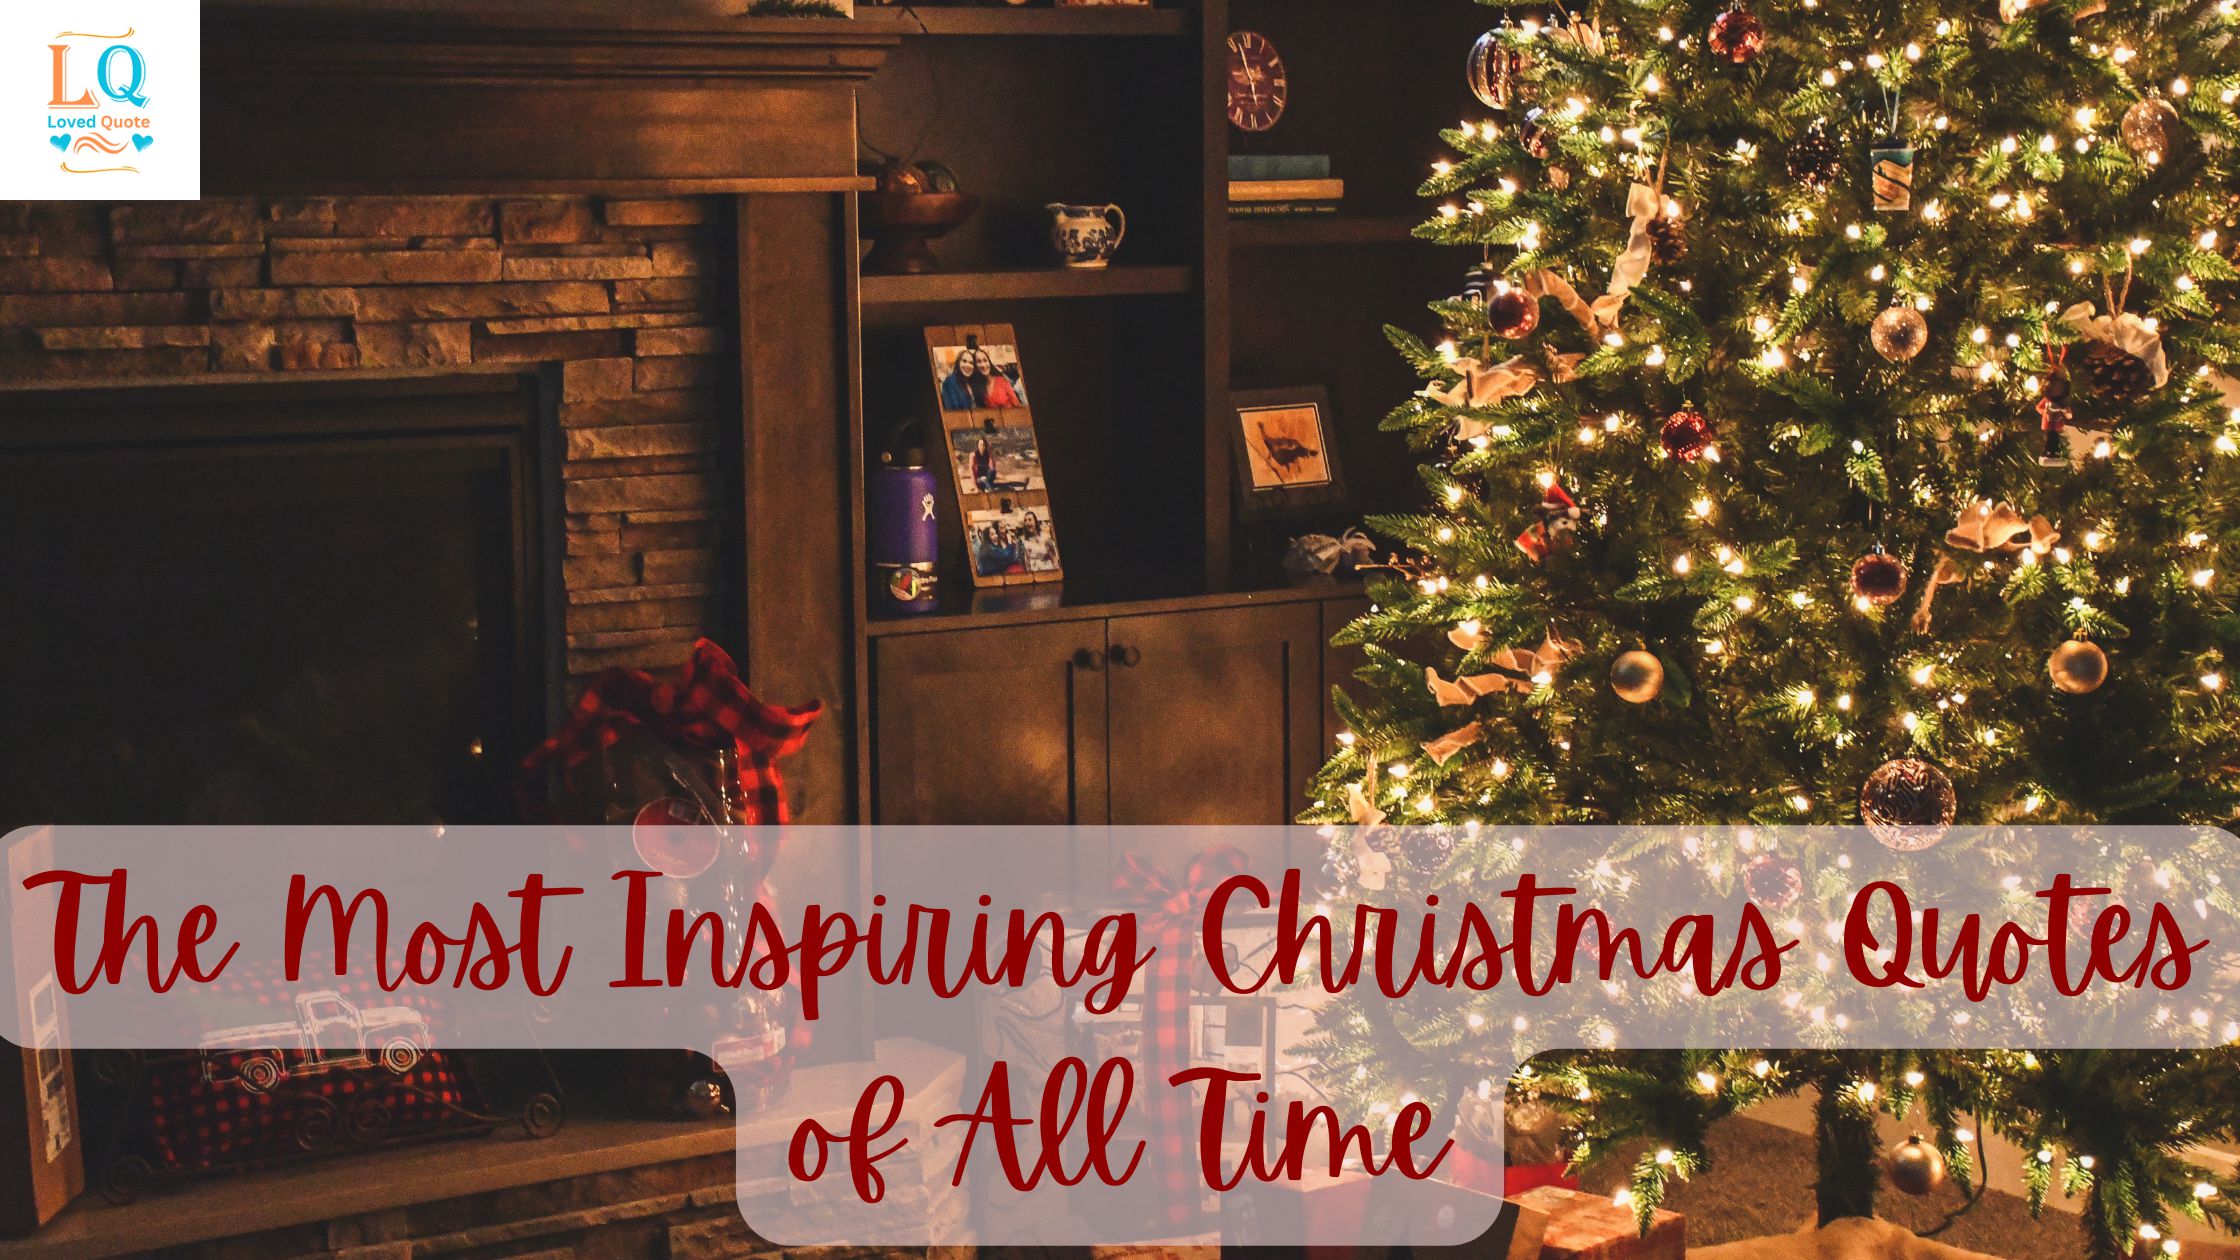 The Most Inspiring Christmas Quotes of All Time